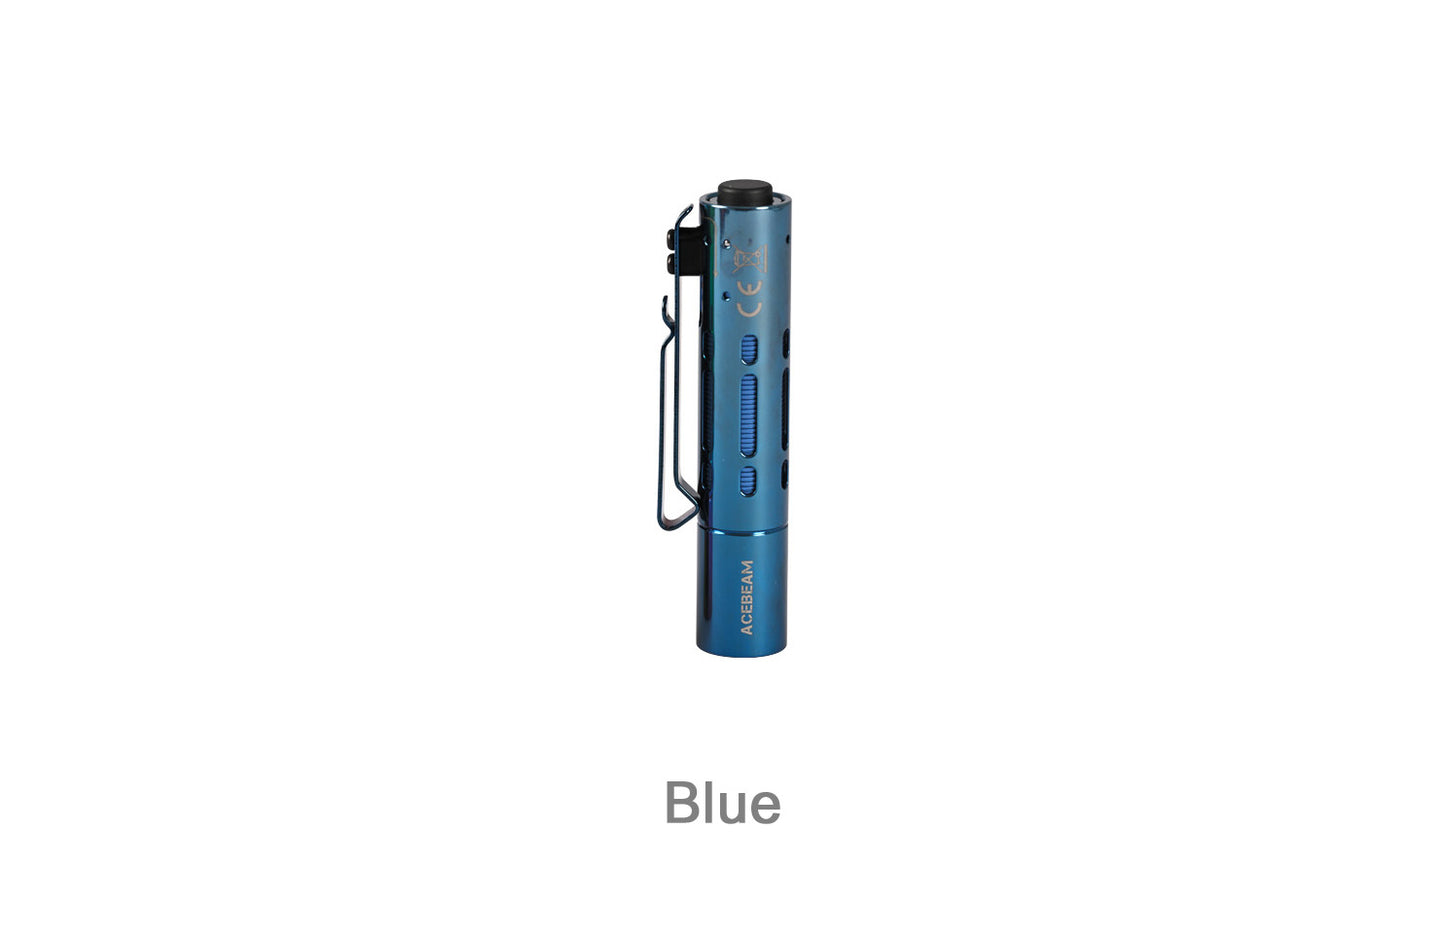 Acebeam Rider RX Stainless Steel EDC AA LED Flashlight With 14500 Battery BLUE